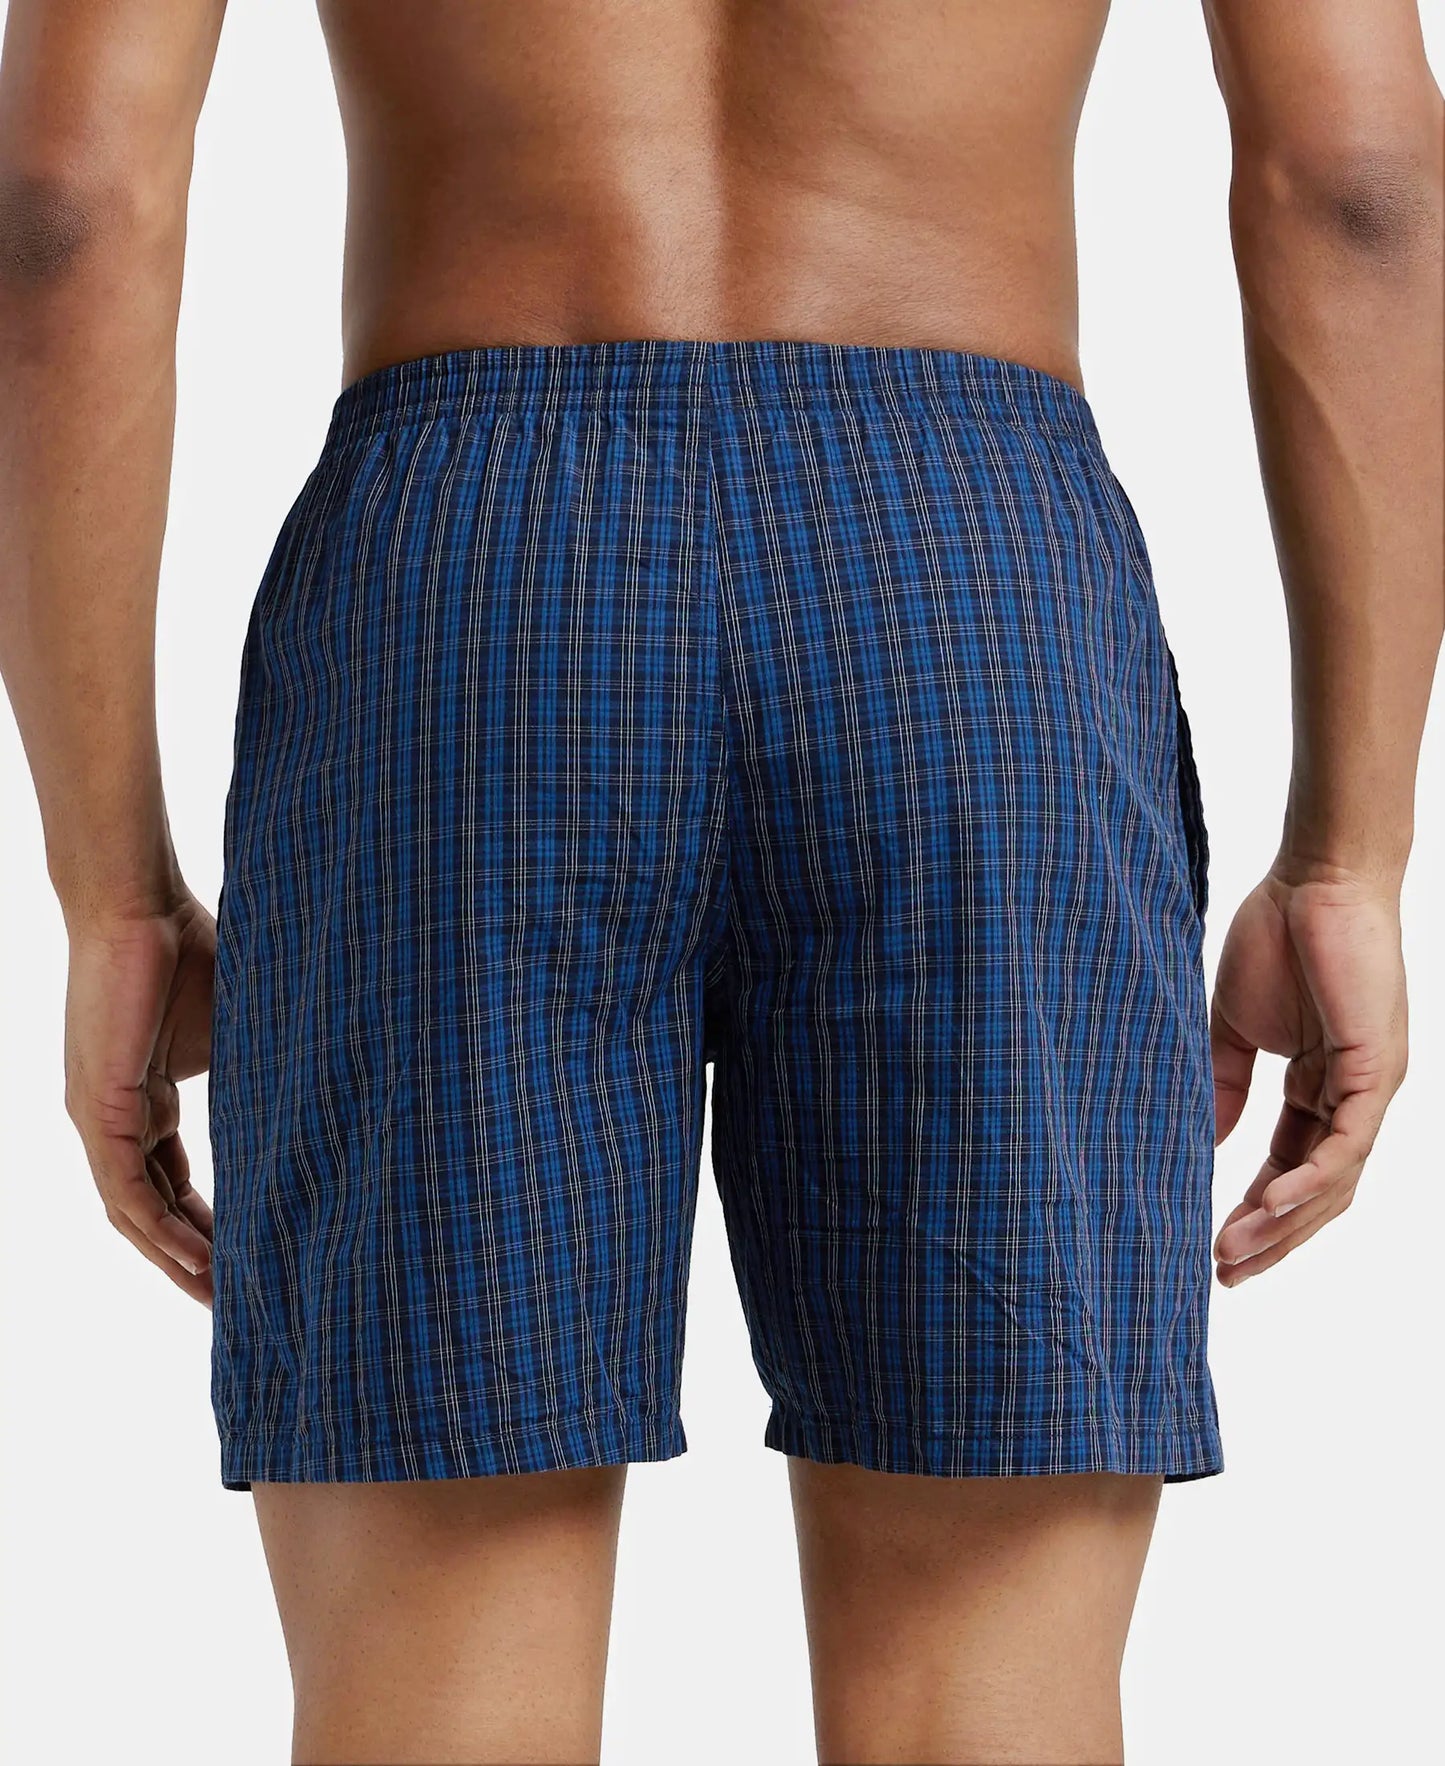 Super Combed Mercerized Cotton Woven Checkered Boxer Shorts with Side Pocket - Navy(Pack of 2)